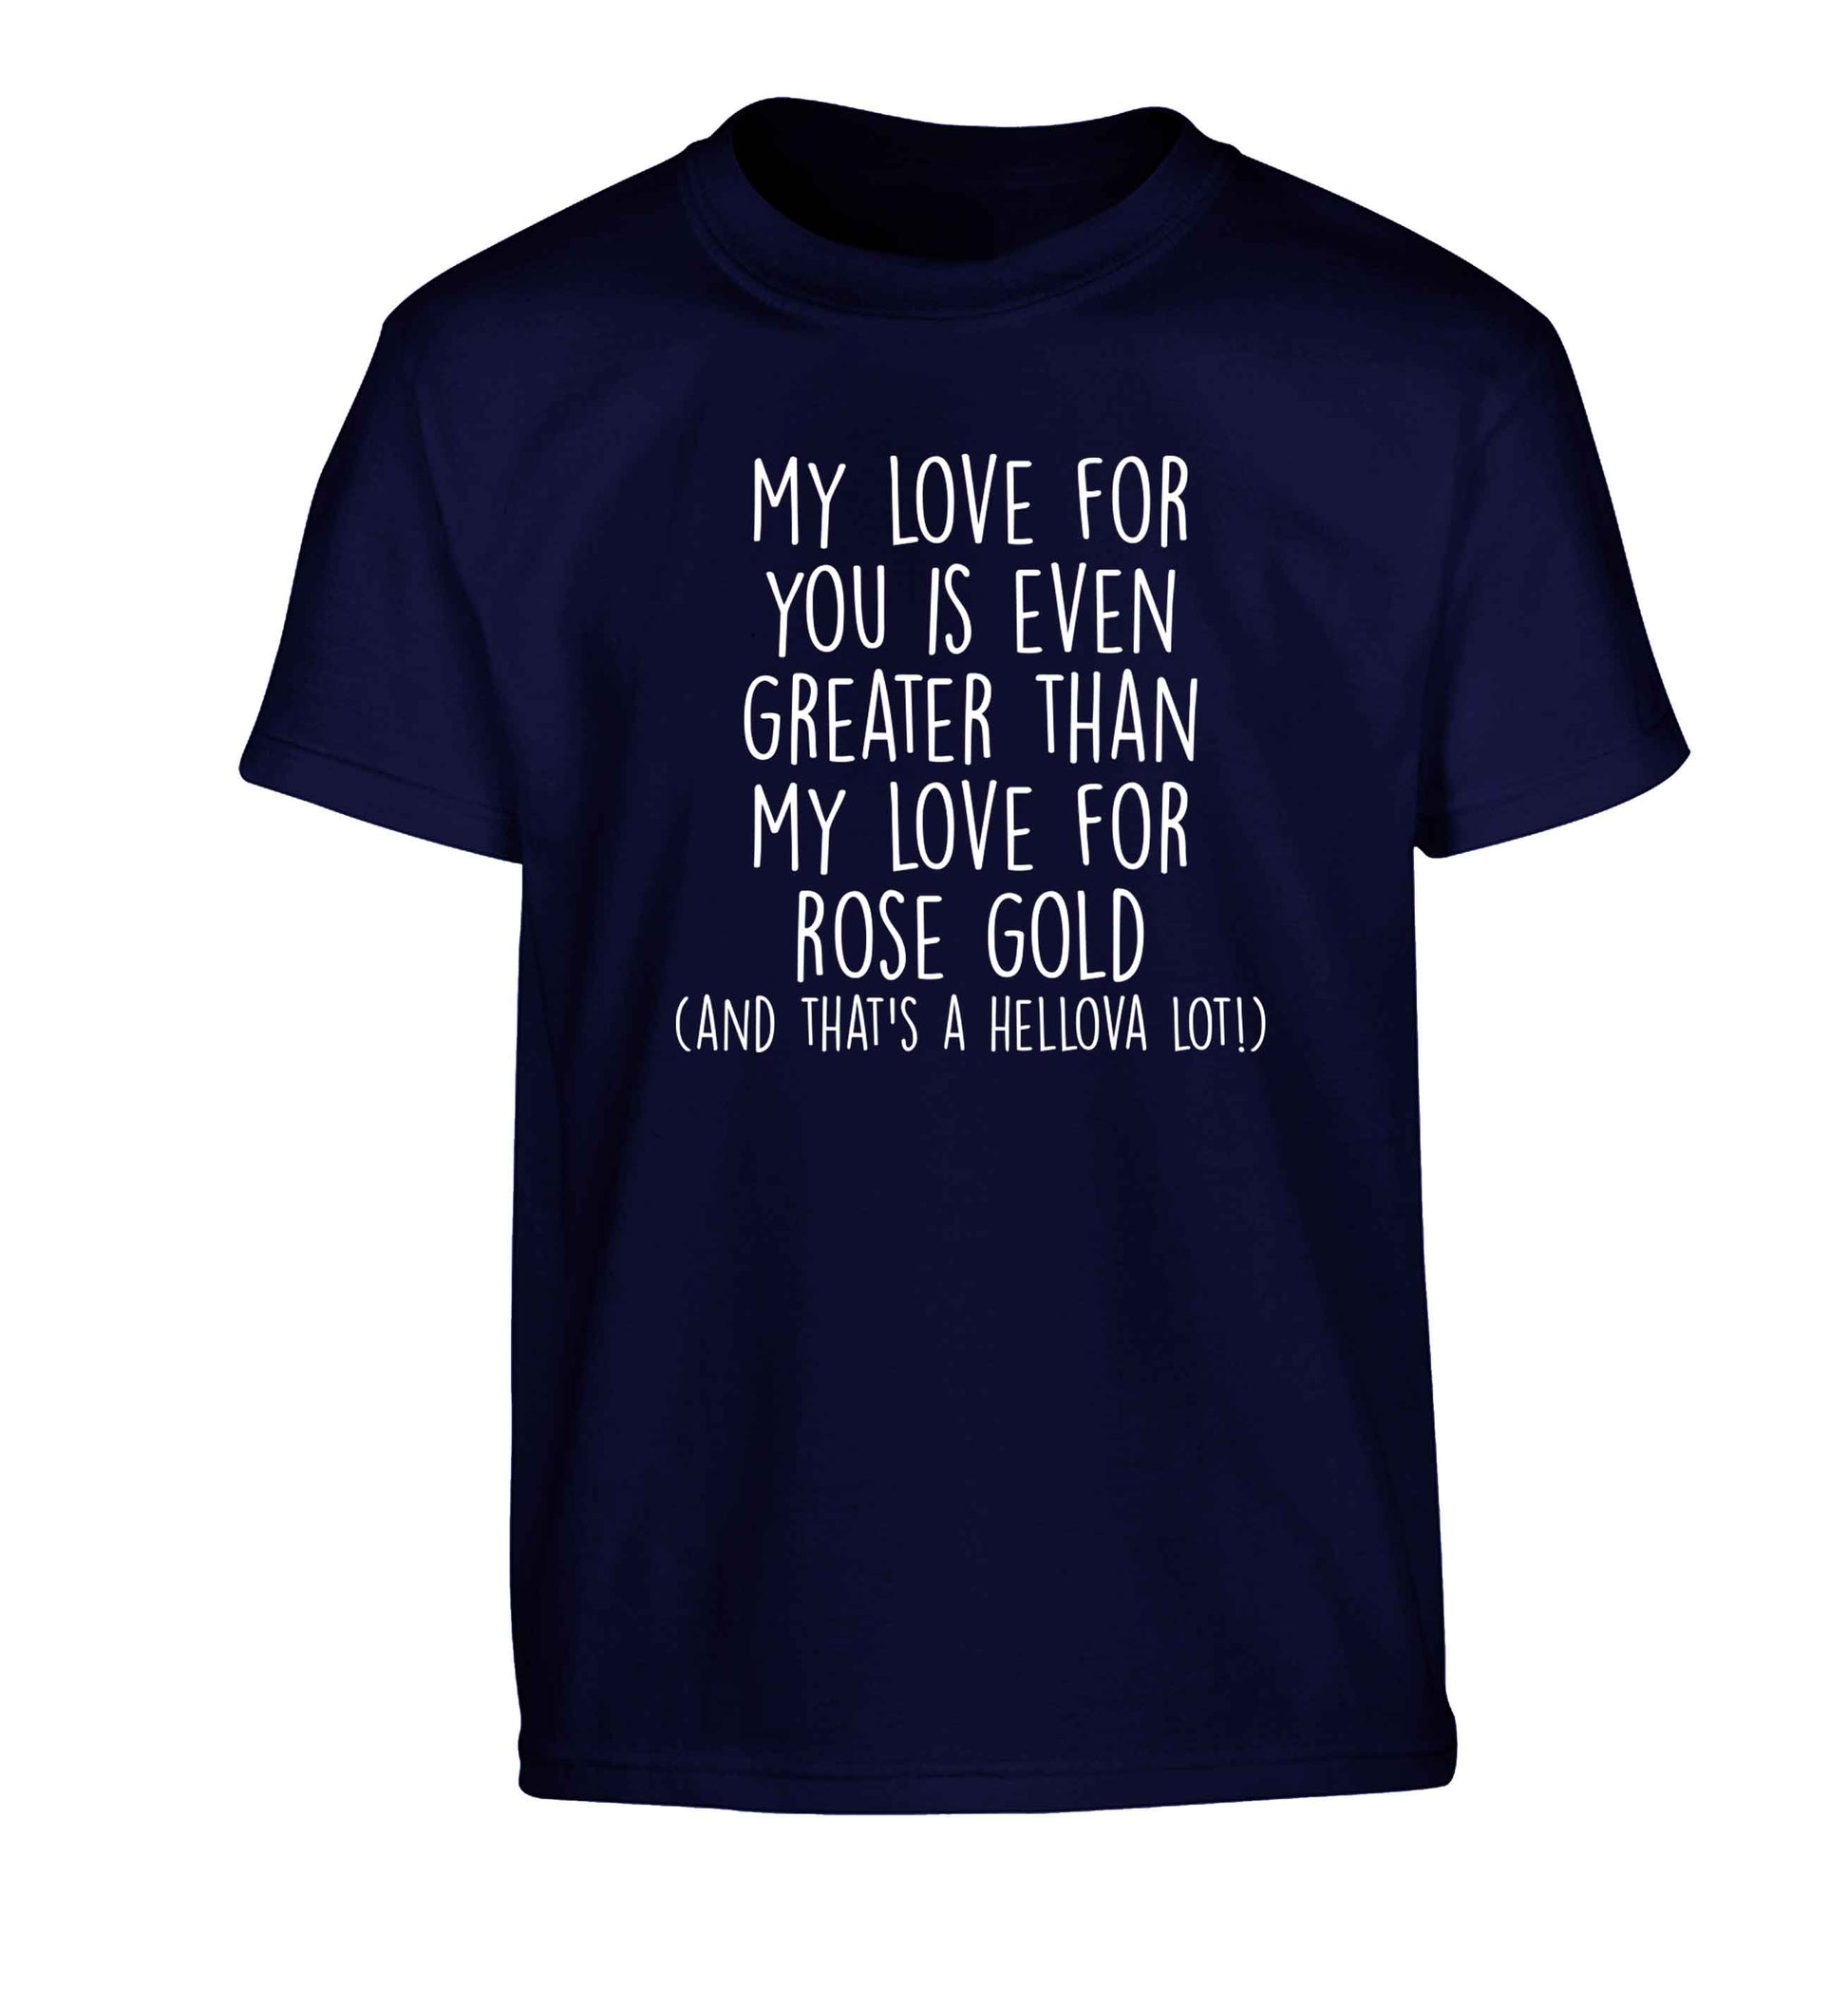 My love for you is even greater than my love for rose gold (and that's a hellova lot) Children's navy Tshirt 12-13 Years